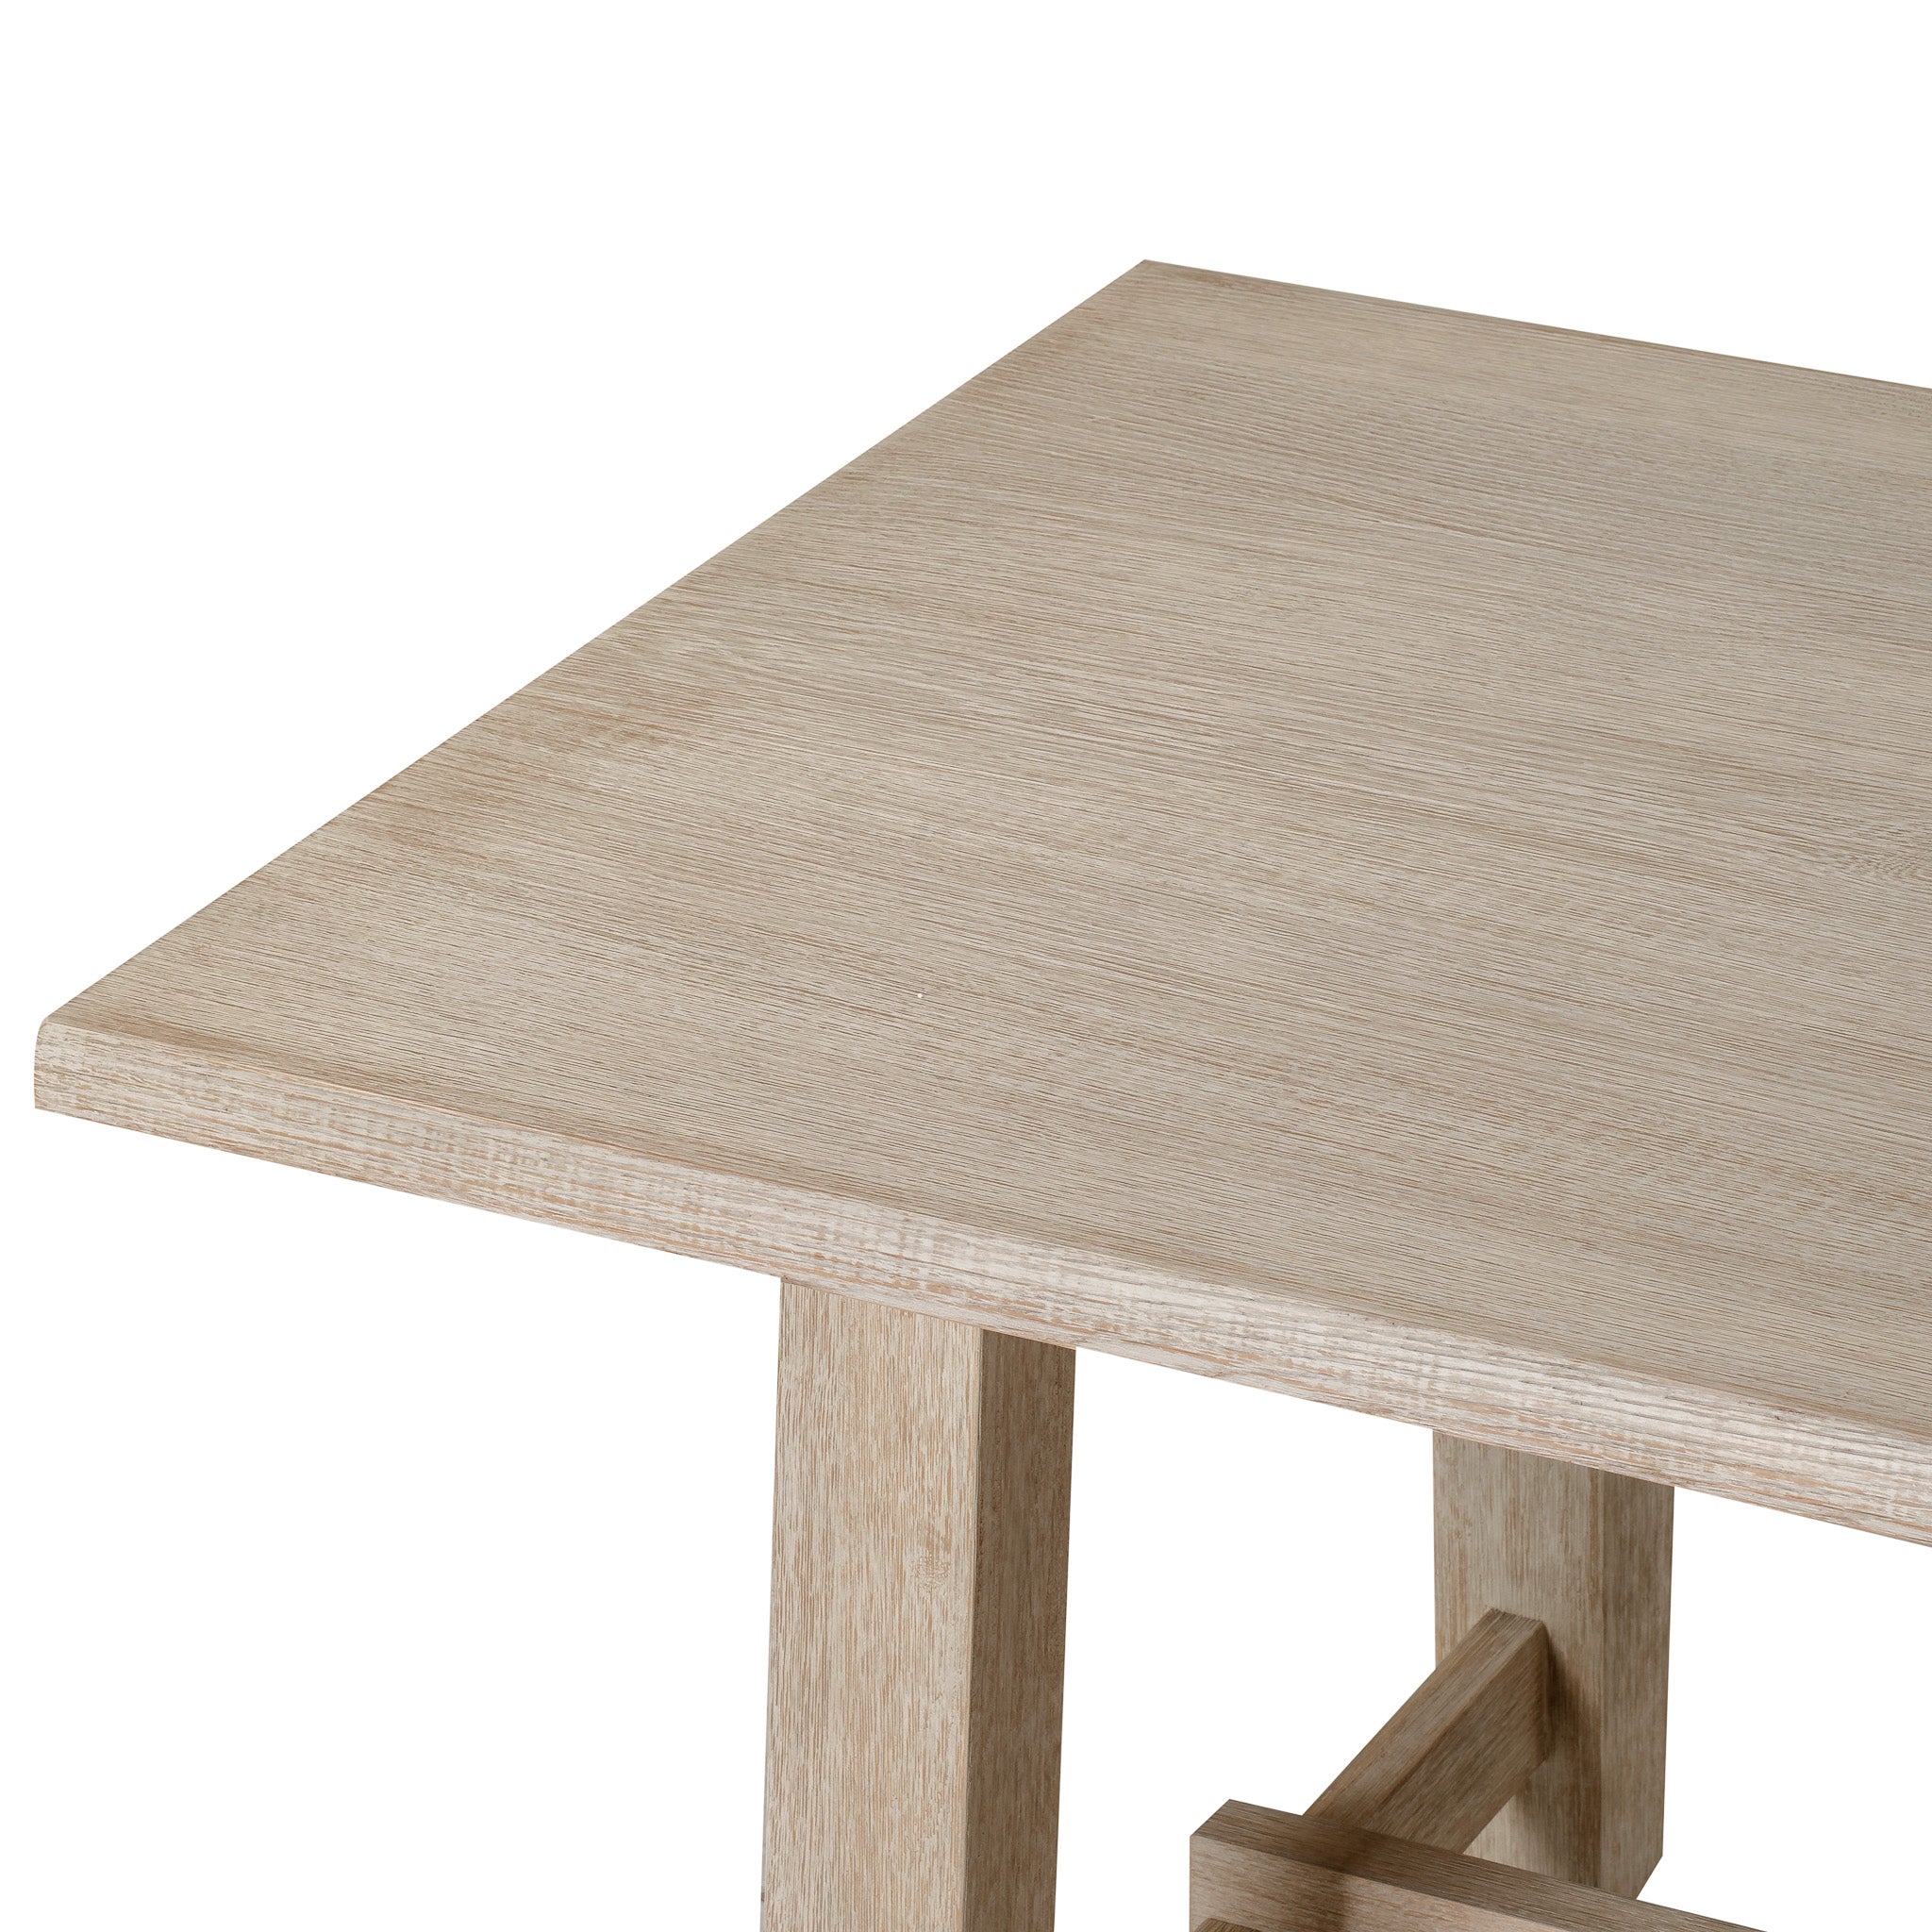 Yves Organic Rectangular Wooden Dining Table in Weathered White Finish in Dining Furniture by Maven Lane